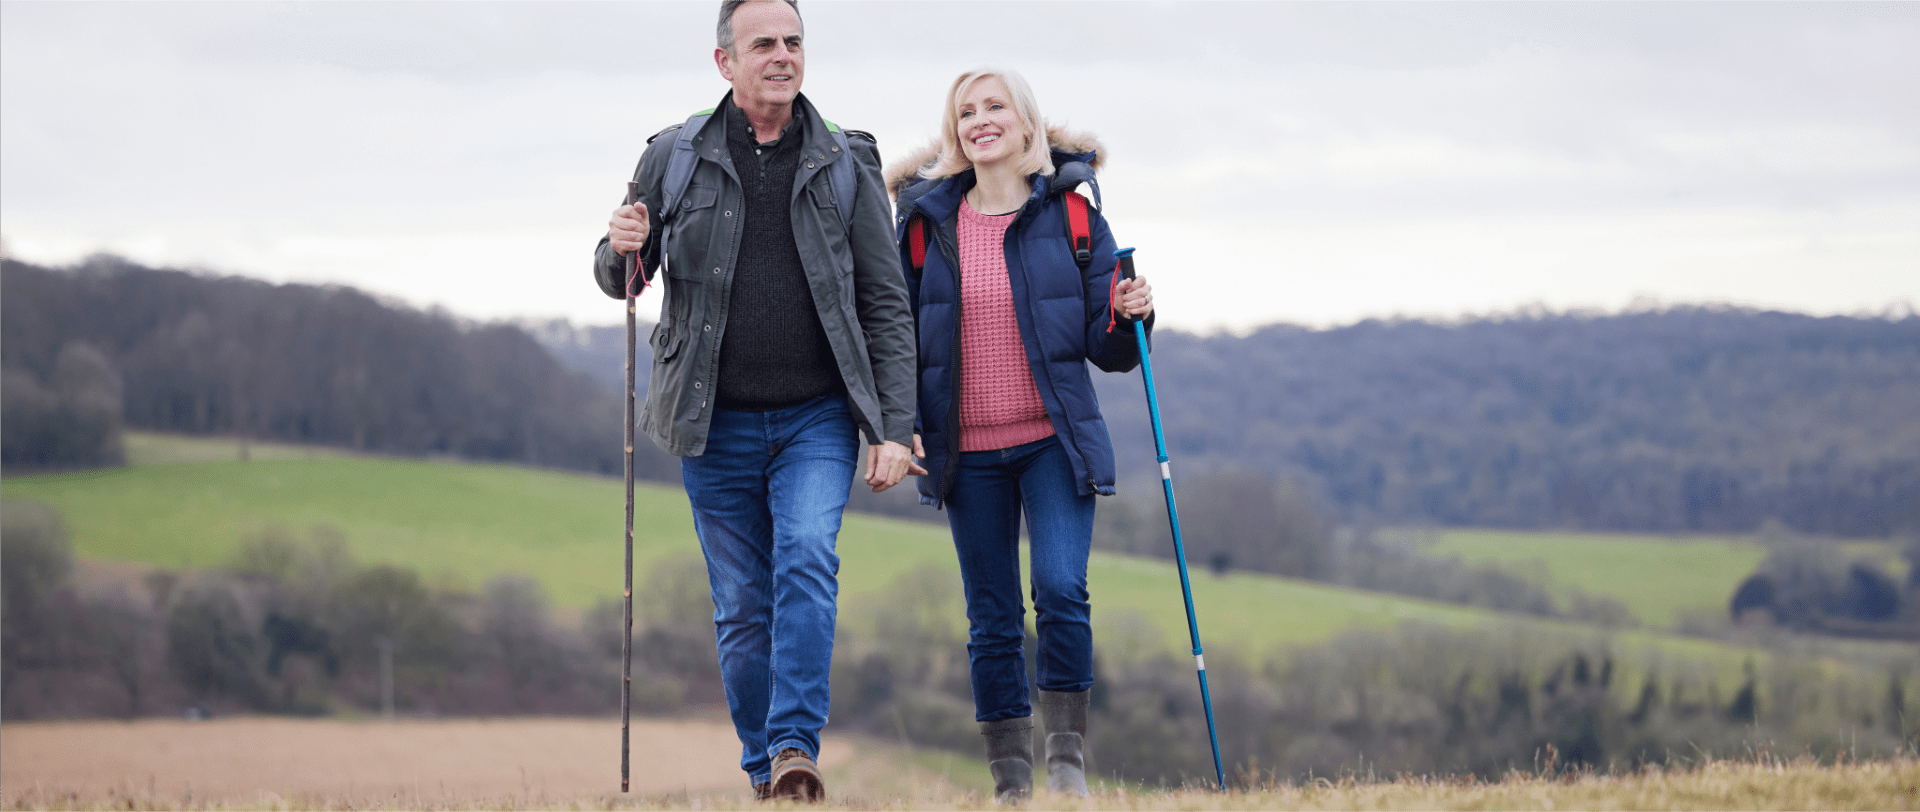 A couple walking through the countryside wearing comfortable shoes, which are important for those with bunions to prevent further irritation or discomfort.